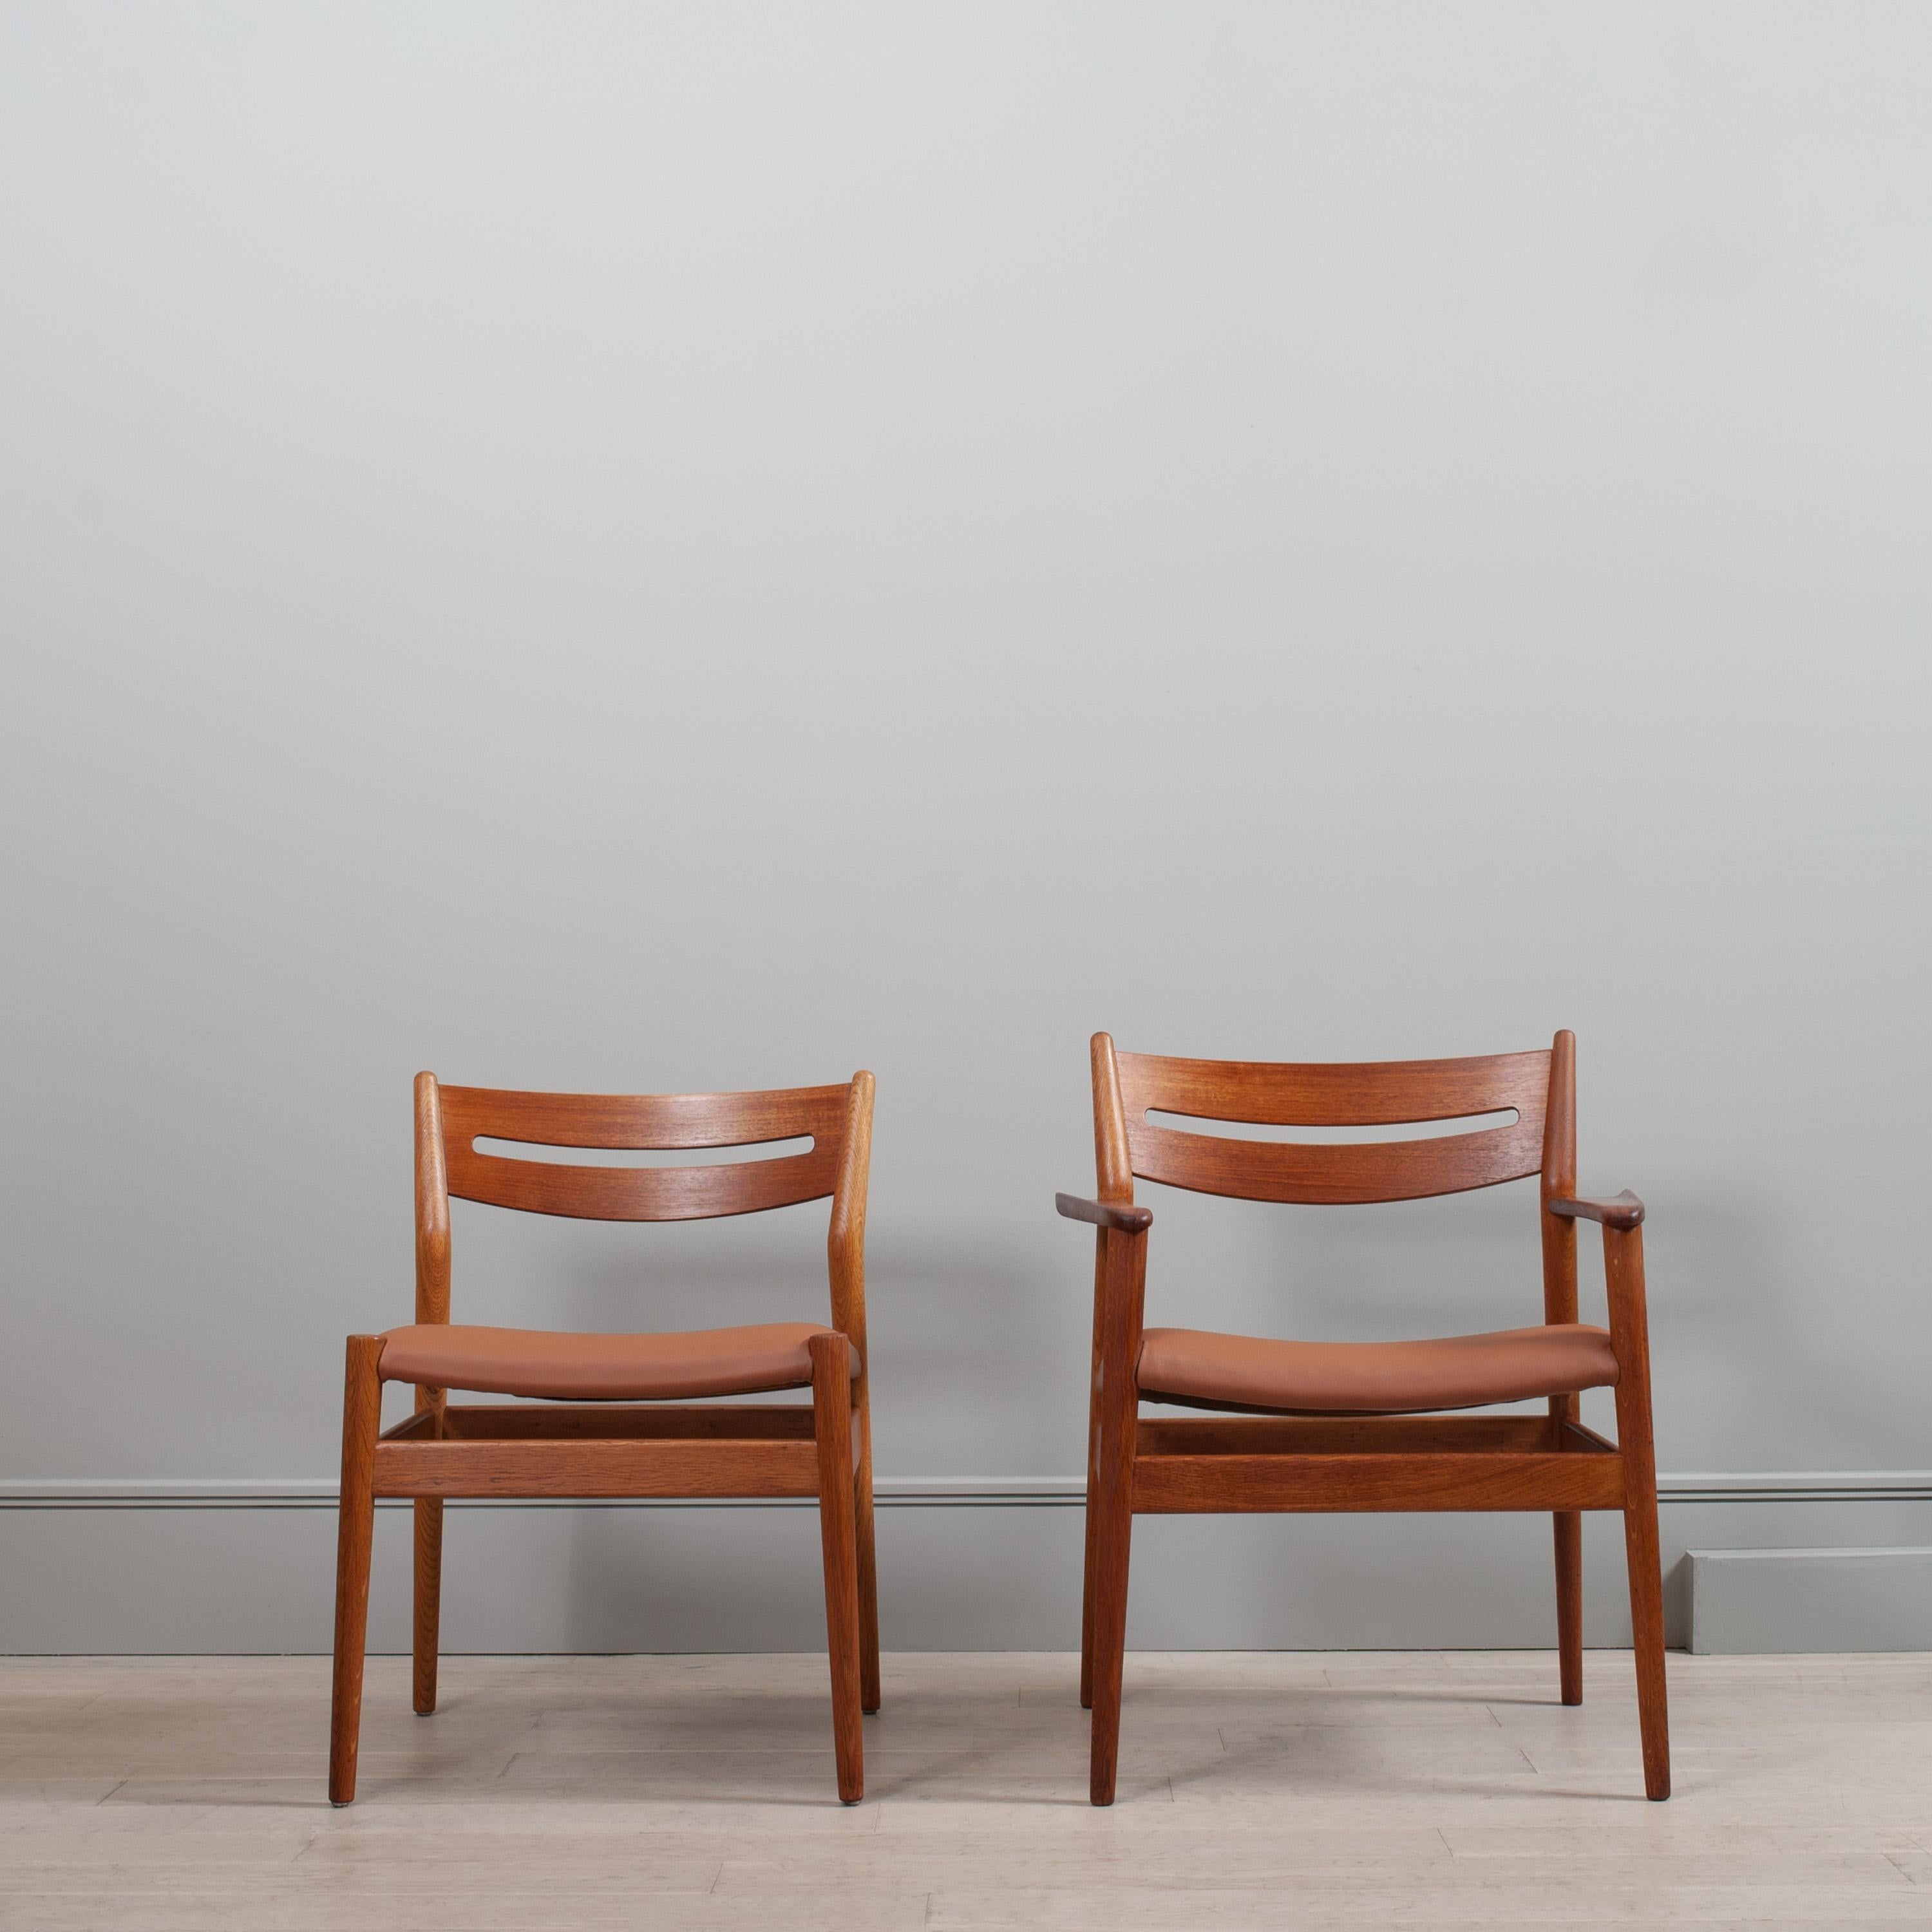 An incredibly rare set of 8 dining chairs by Grete Jalk. 
Model 32-42 designed by Grete Jalk in 1962 and produced by the fine furniture maker Sibast. This striking Scandinavian Modernist set of chairs comprises 6 side chairs and 2 carver end chairs.